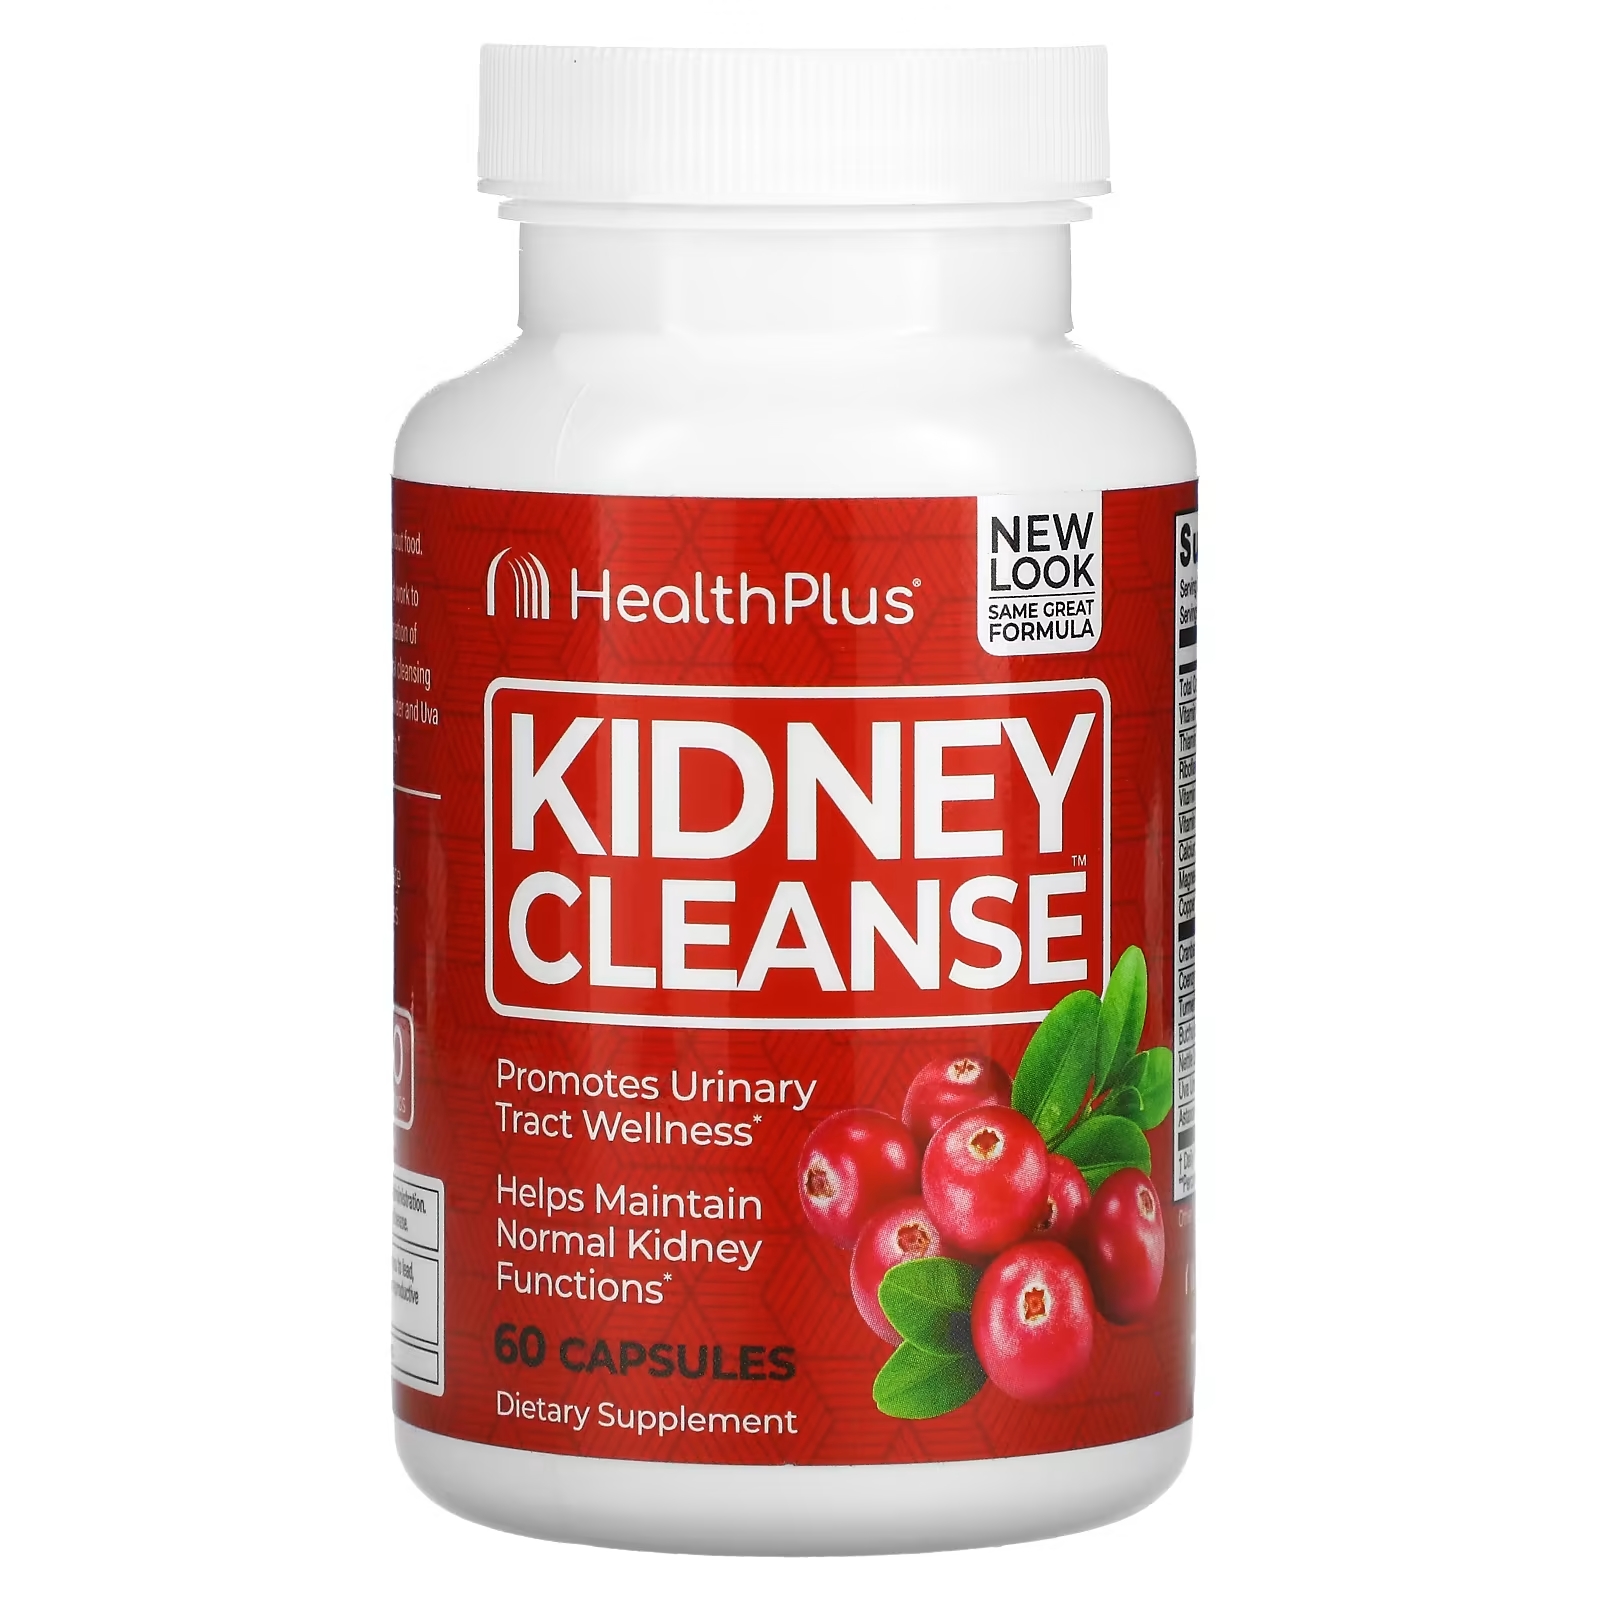 Health Plus Kidney Cleanse очищение почек, 60 капсул kidney cleanse detox pills enhance male erection kidney function support urinary tract health cure renal deficiency supplements